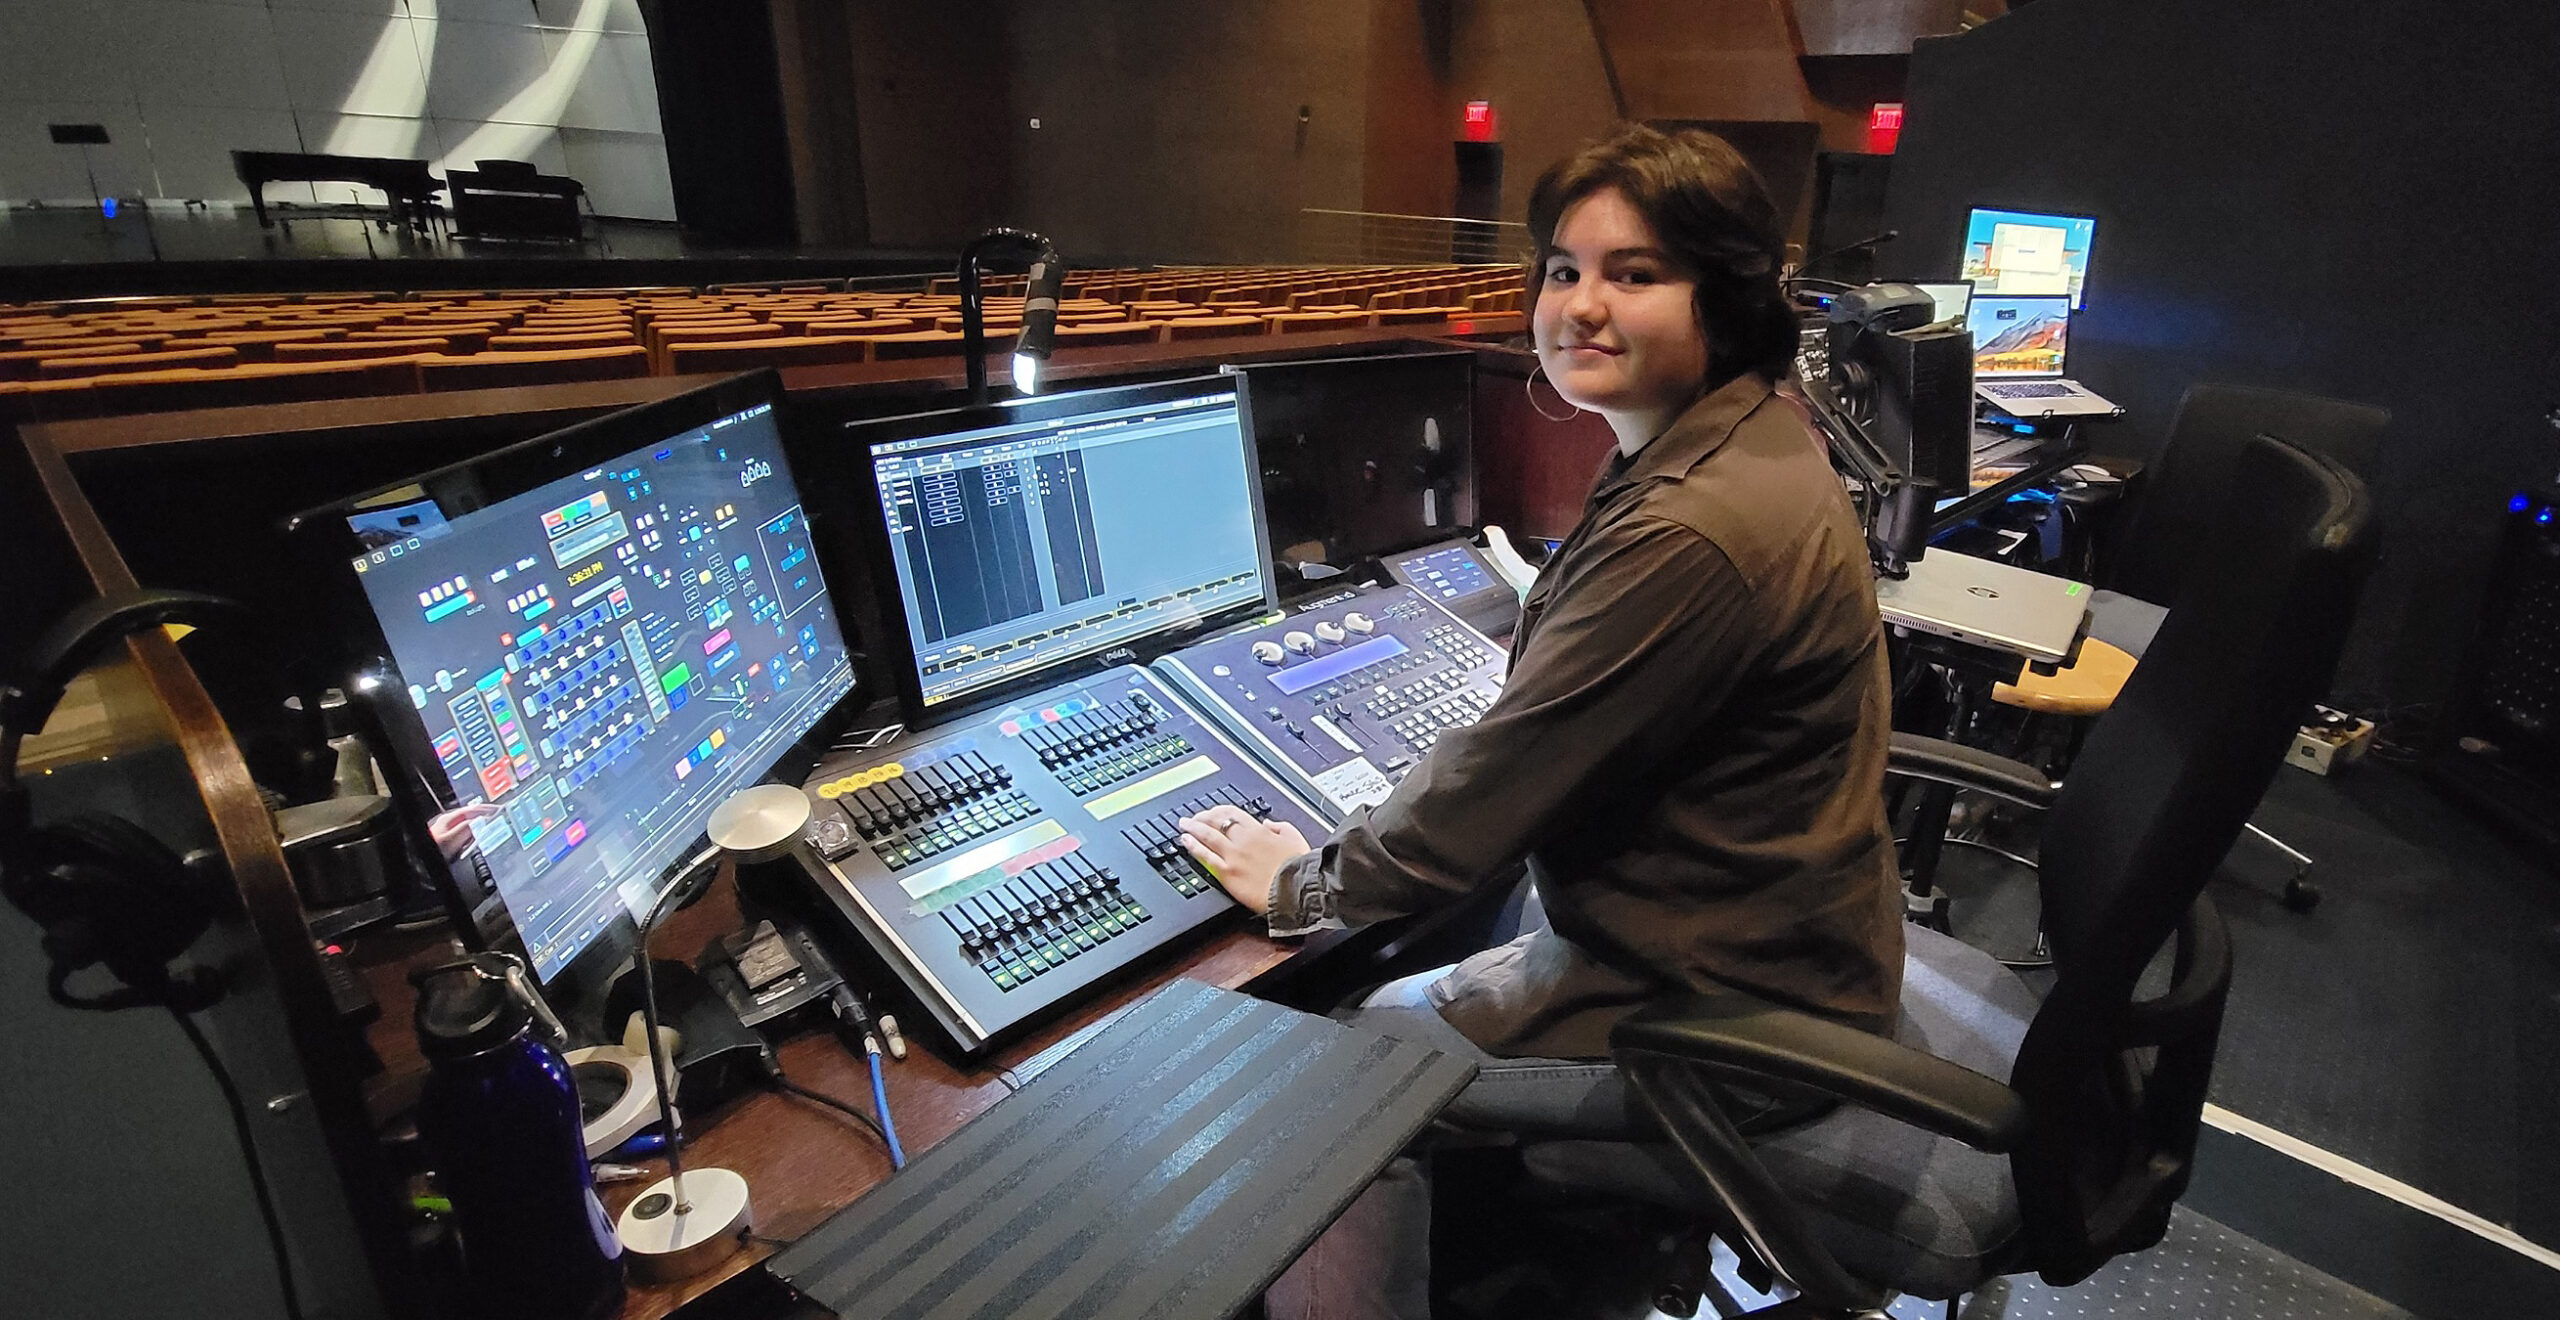 Harlingen Performing Arts Conservatory student recognized for technical theatre work